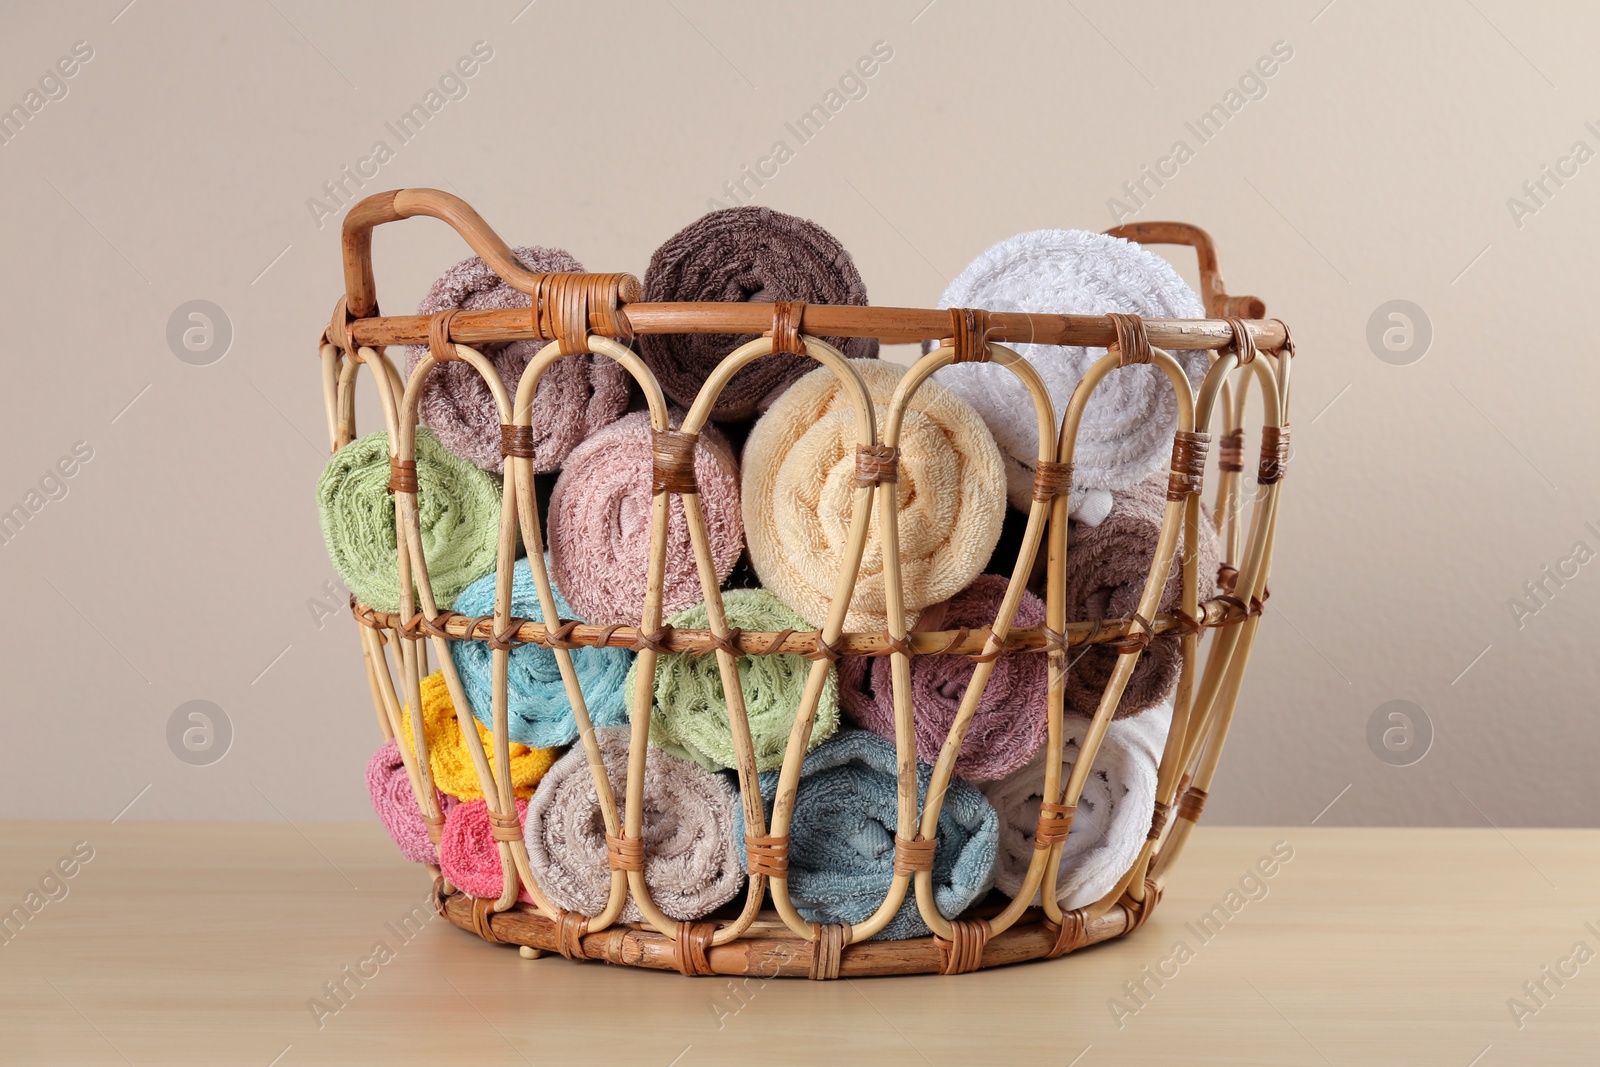 Photo of Wicker basket with clean soft towels on wooden table